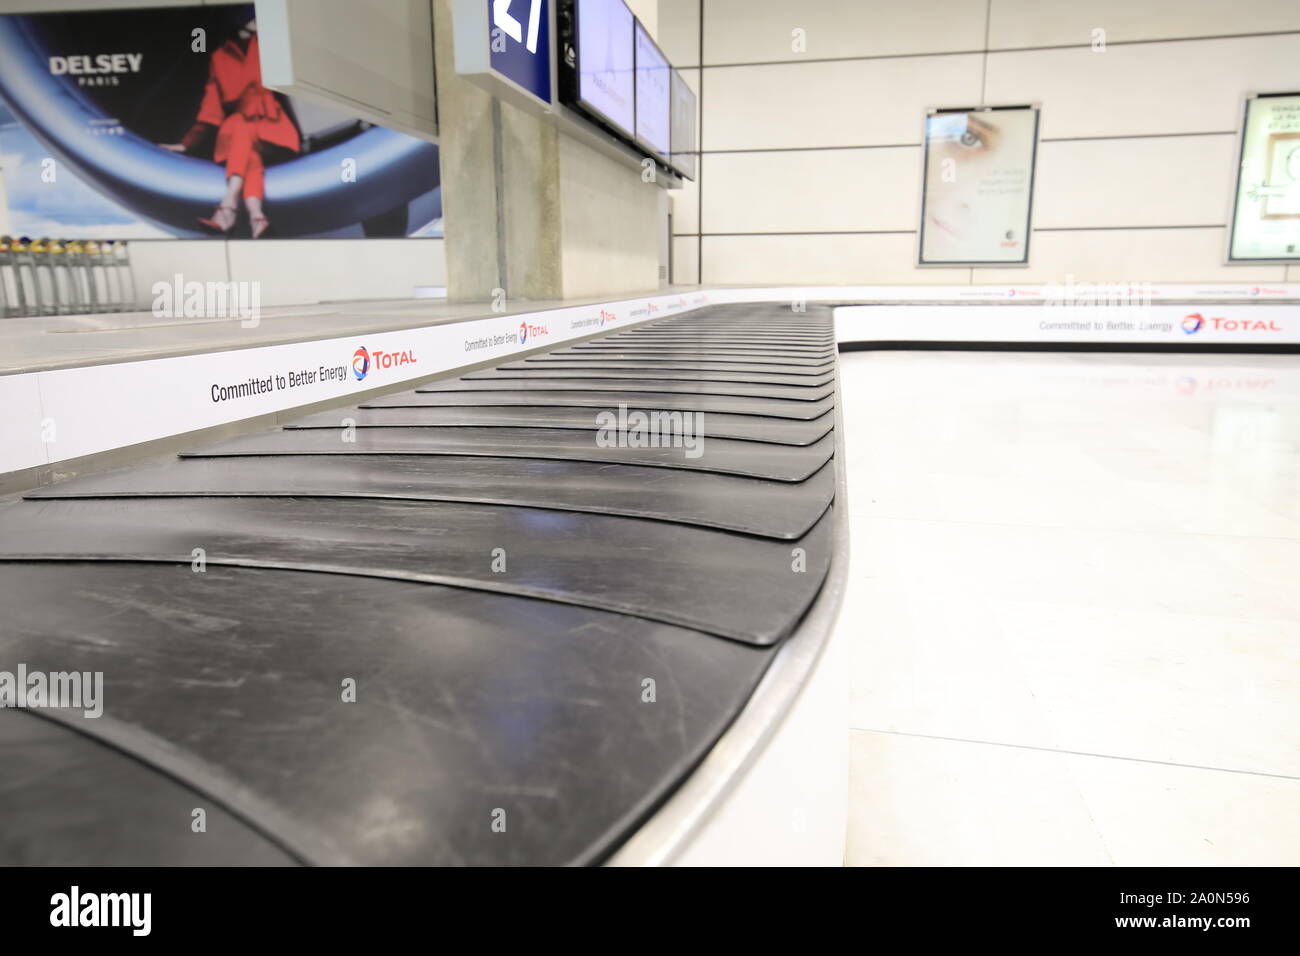 luggage carousel at Charles de Gaulle Airport Paris France Stock Photo